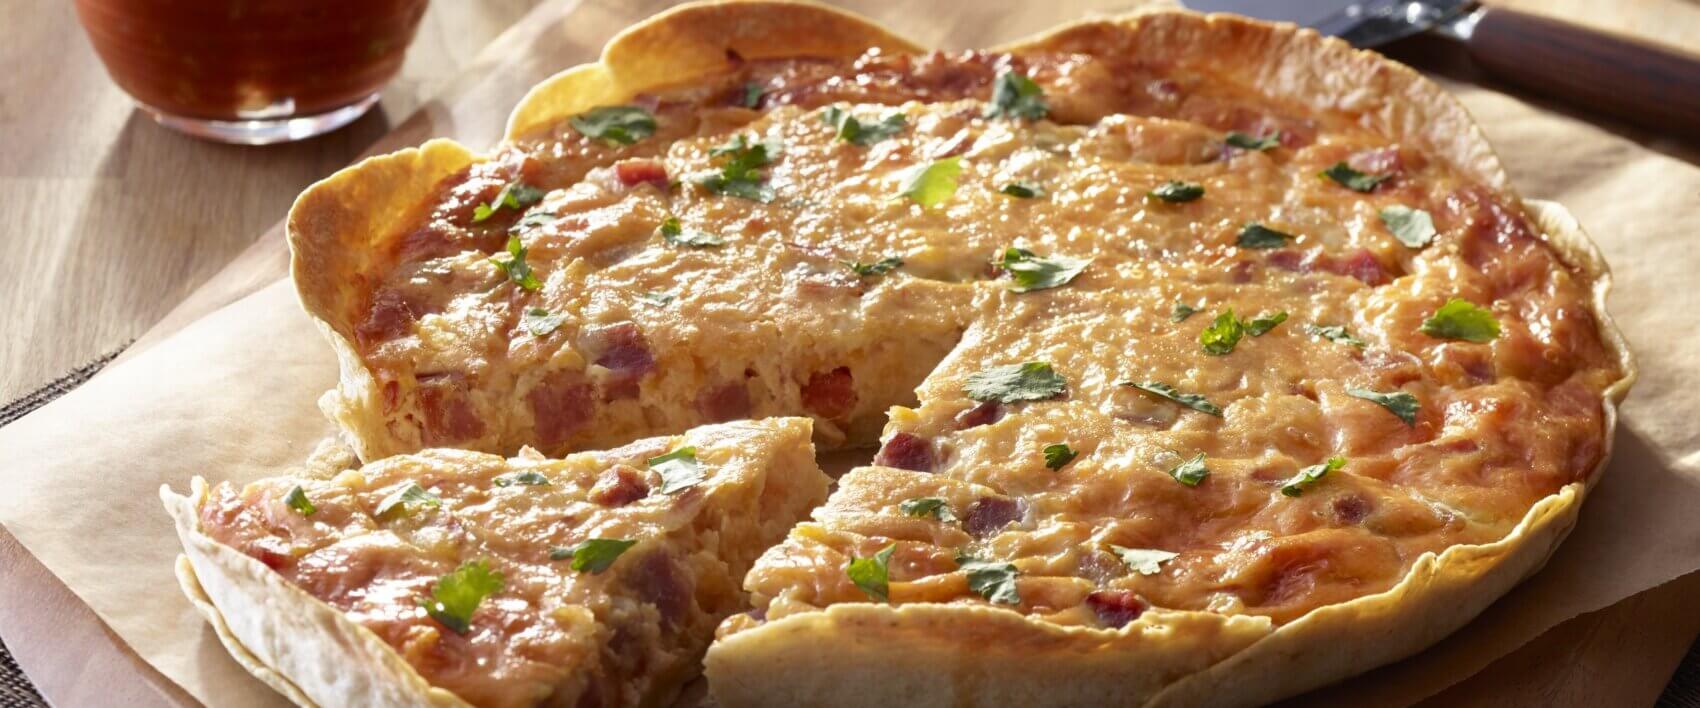 Southwest Ham and Cheese Quiche